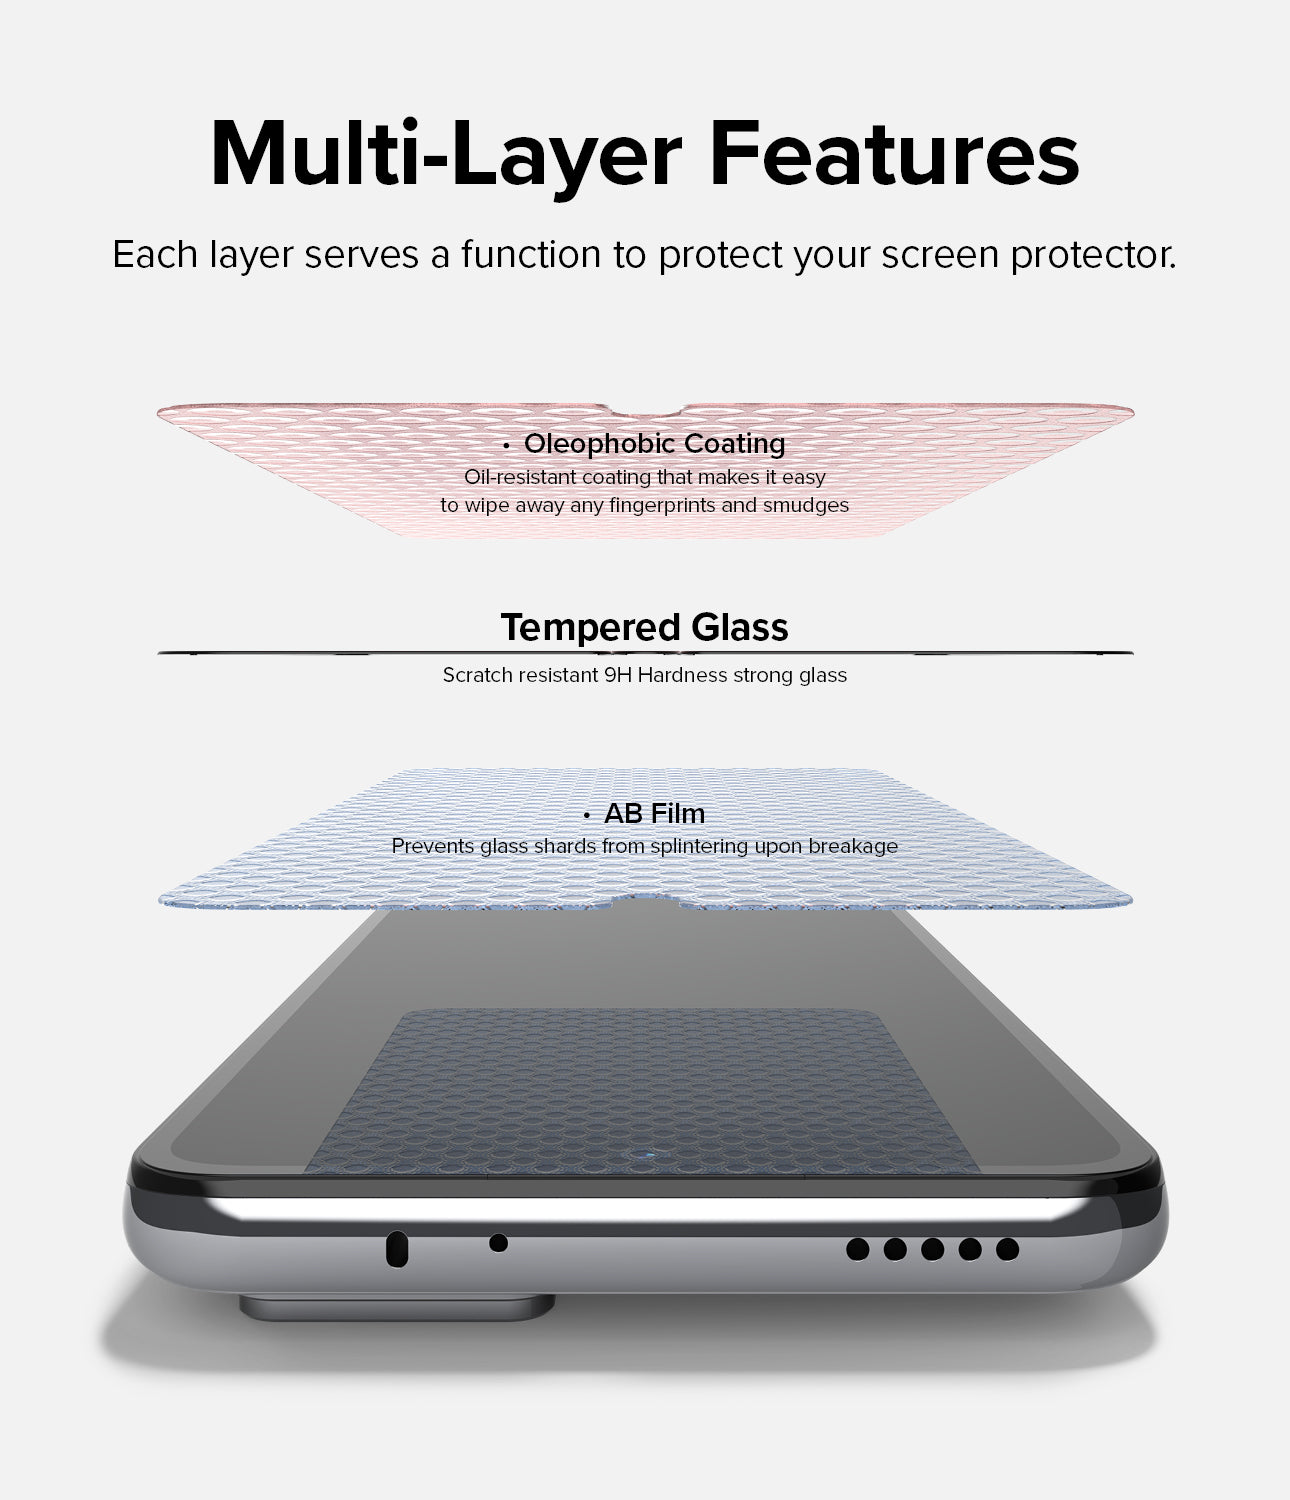 Multi-Layer Features - Each layer serves a function to protect your screen protector. * Oleophobic Coating - Oil-resistant coating that makes it easy to wipe away any fingerprints and smudges. *Tempered Glass - Scratch resistant 9H Hardness strong glass * AB Film - Prevents glass shards from splintering upon breakage.